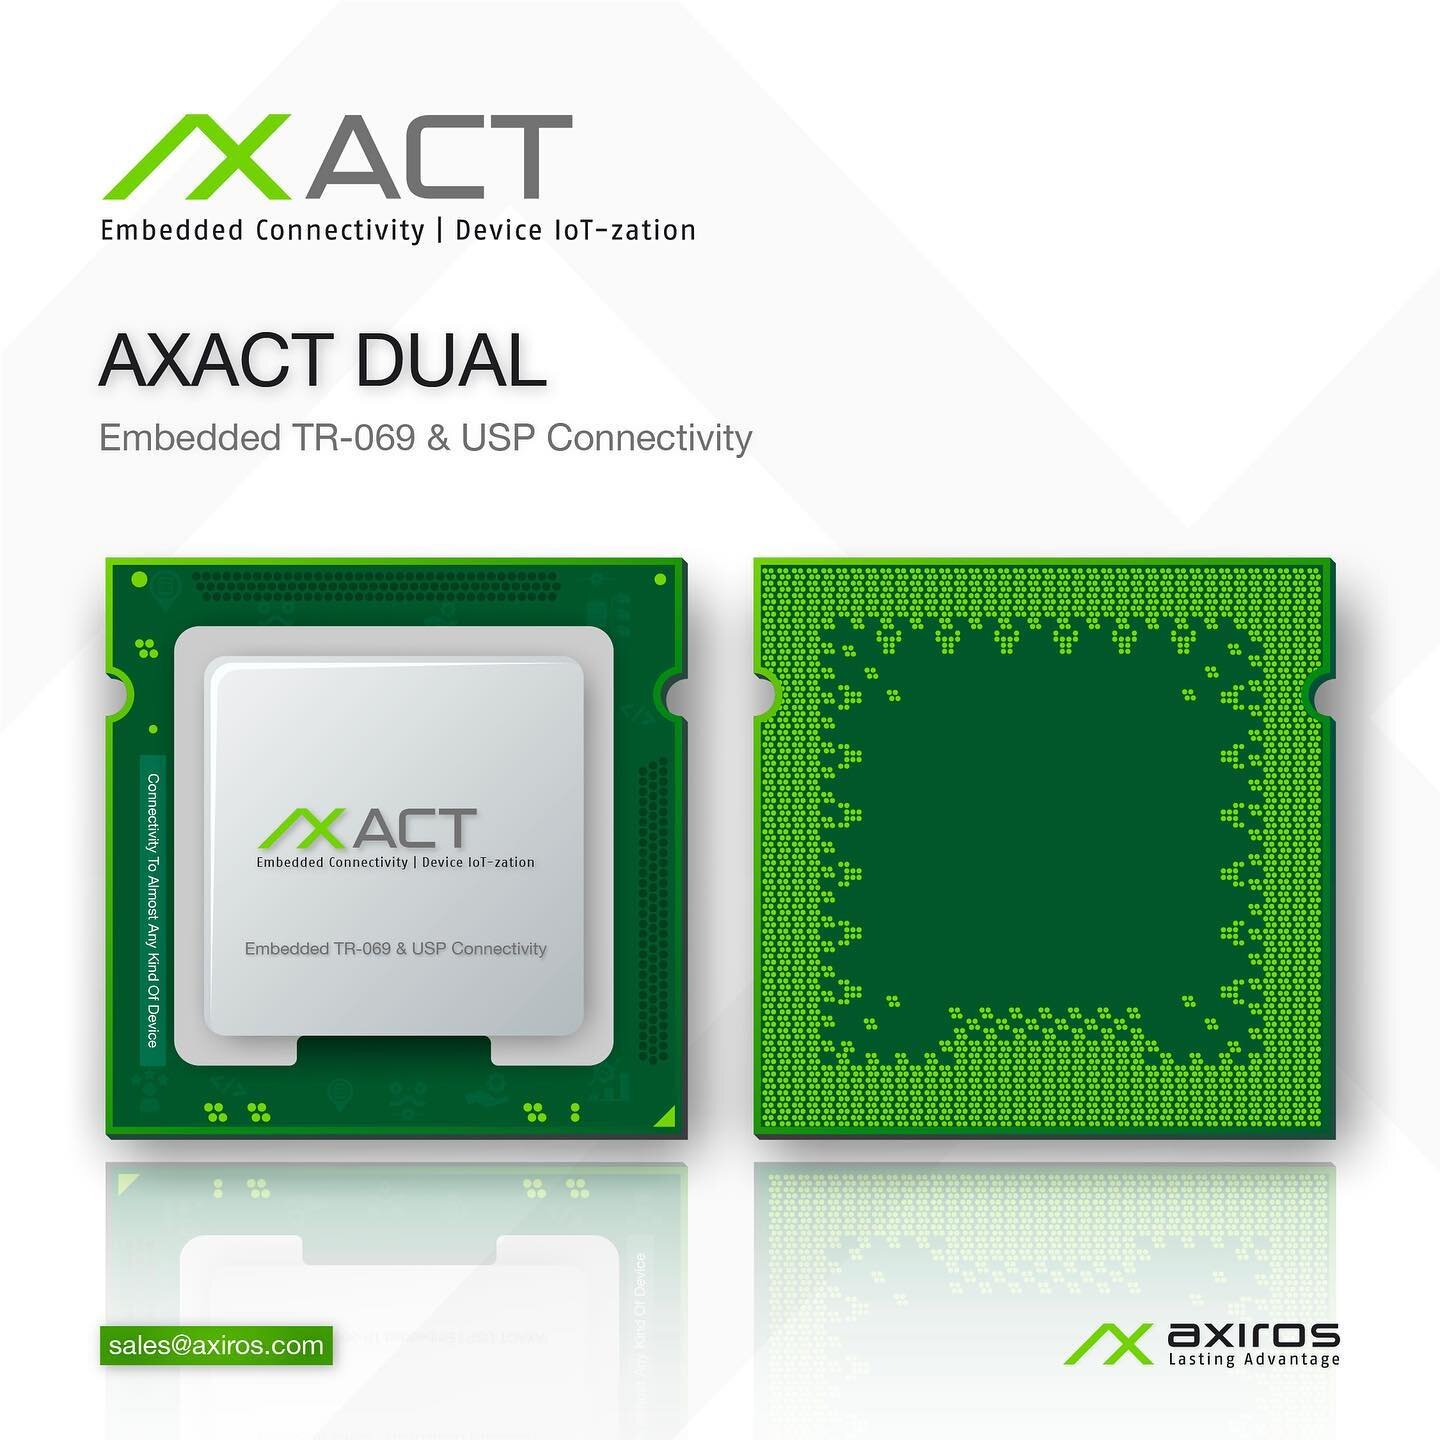 [Axiros Products] AXACT TR-069 / USP Stack - Connectivity To Almost Any Kind Of Device

➡️ AXACT provides a fully Broadband Forum (&ldquo;BBF&rdquo;) standards compliant #TR069 and #TR369 / USP Agent management solution. 

To learn more about the tec